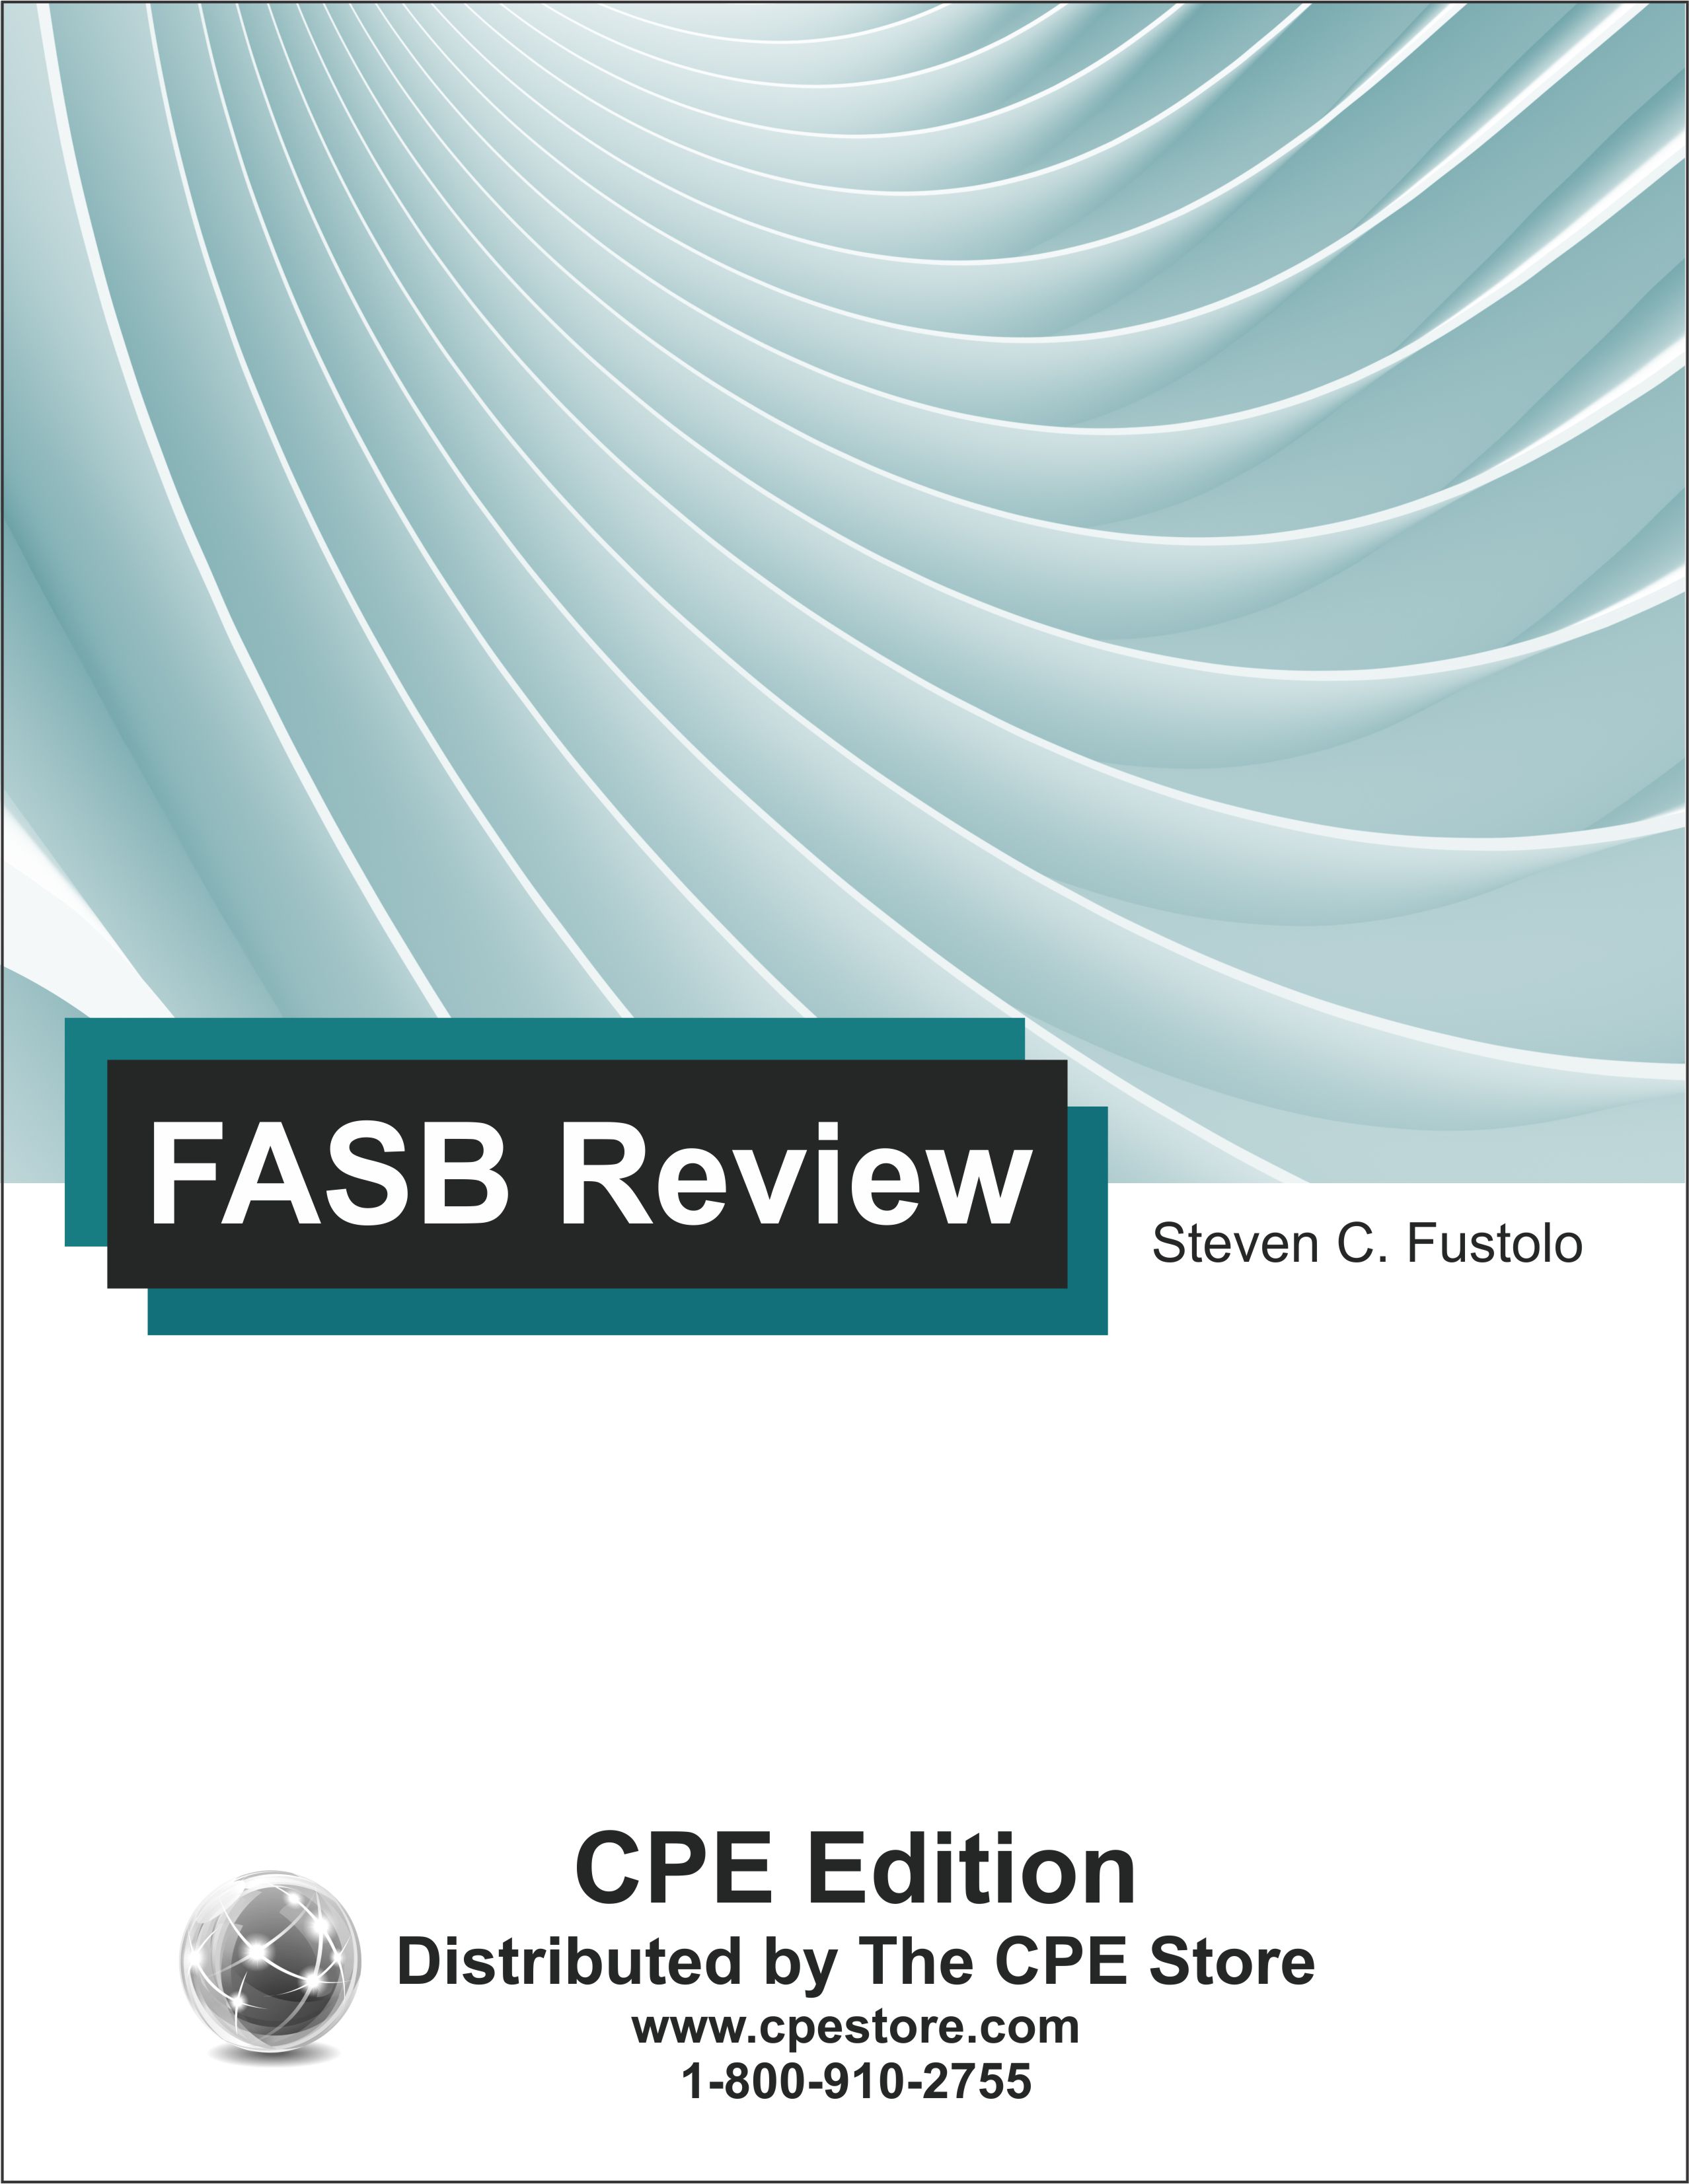 FASB Review